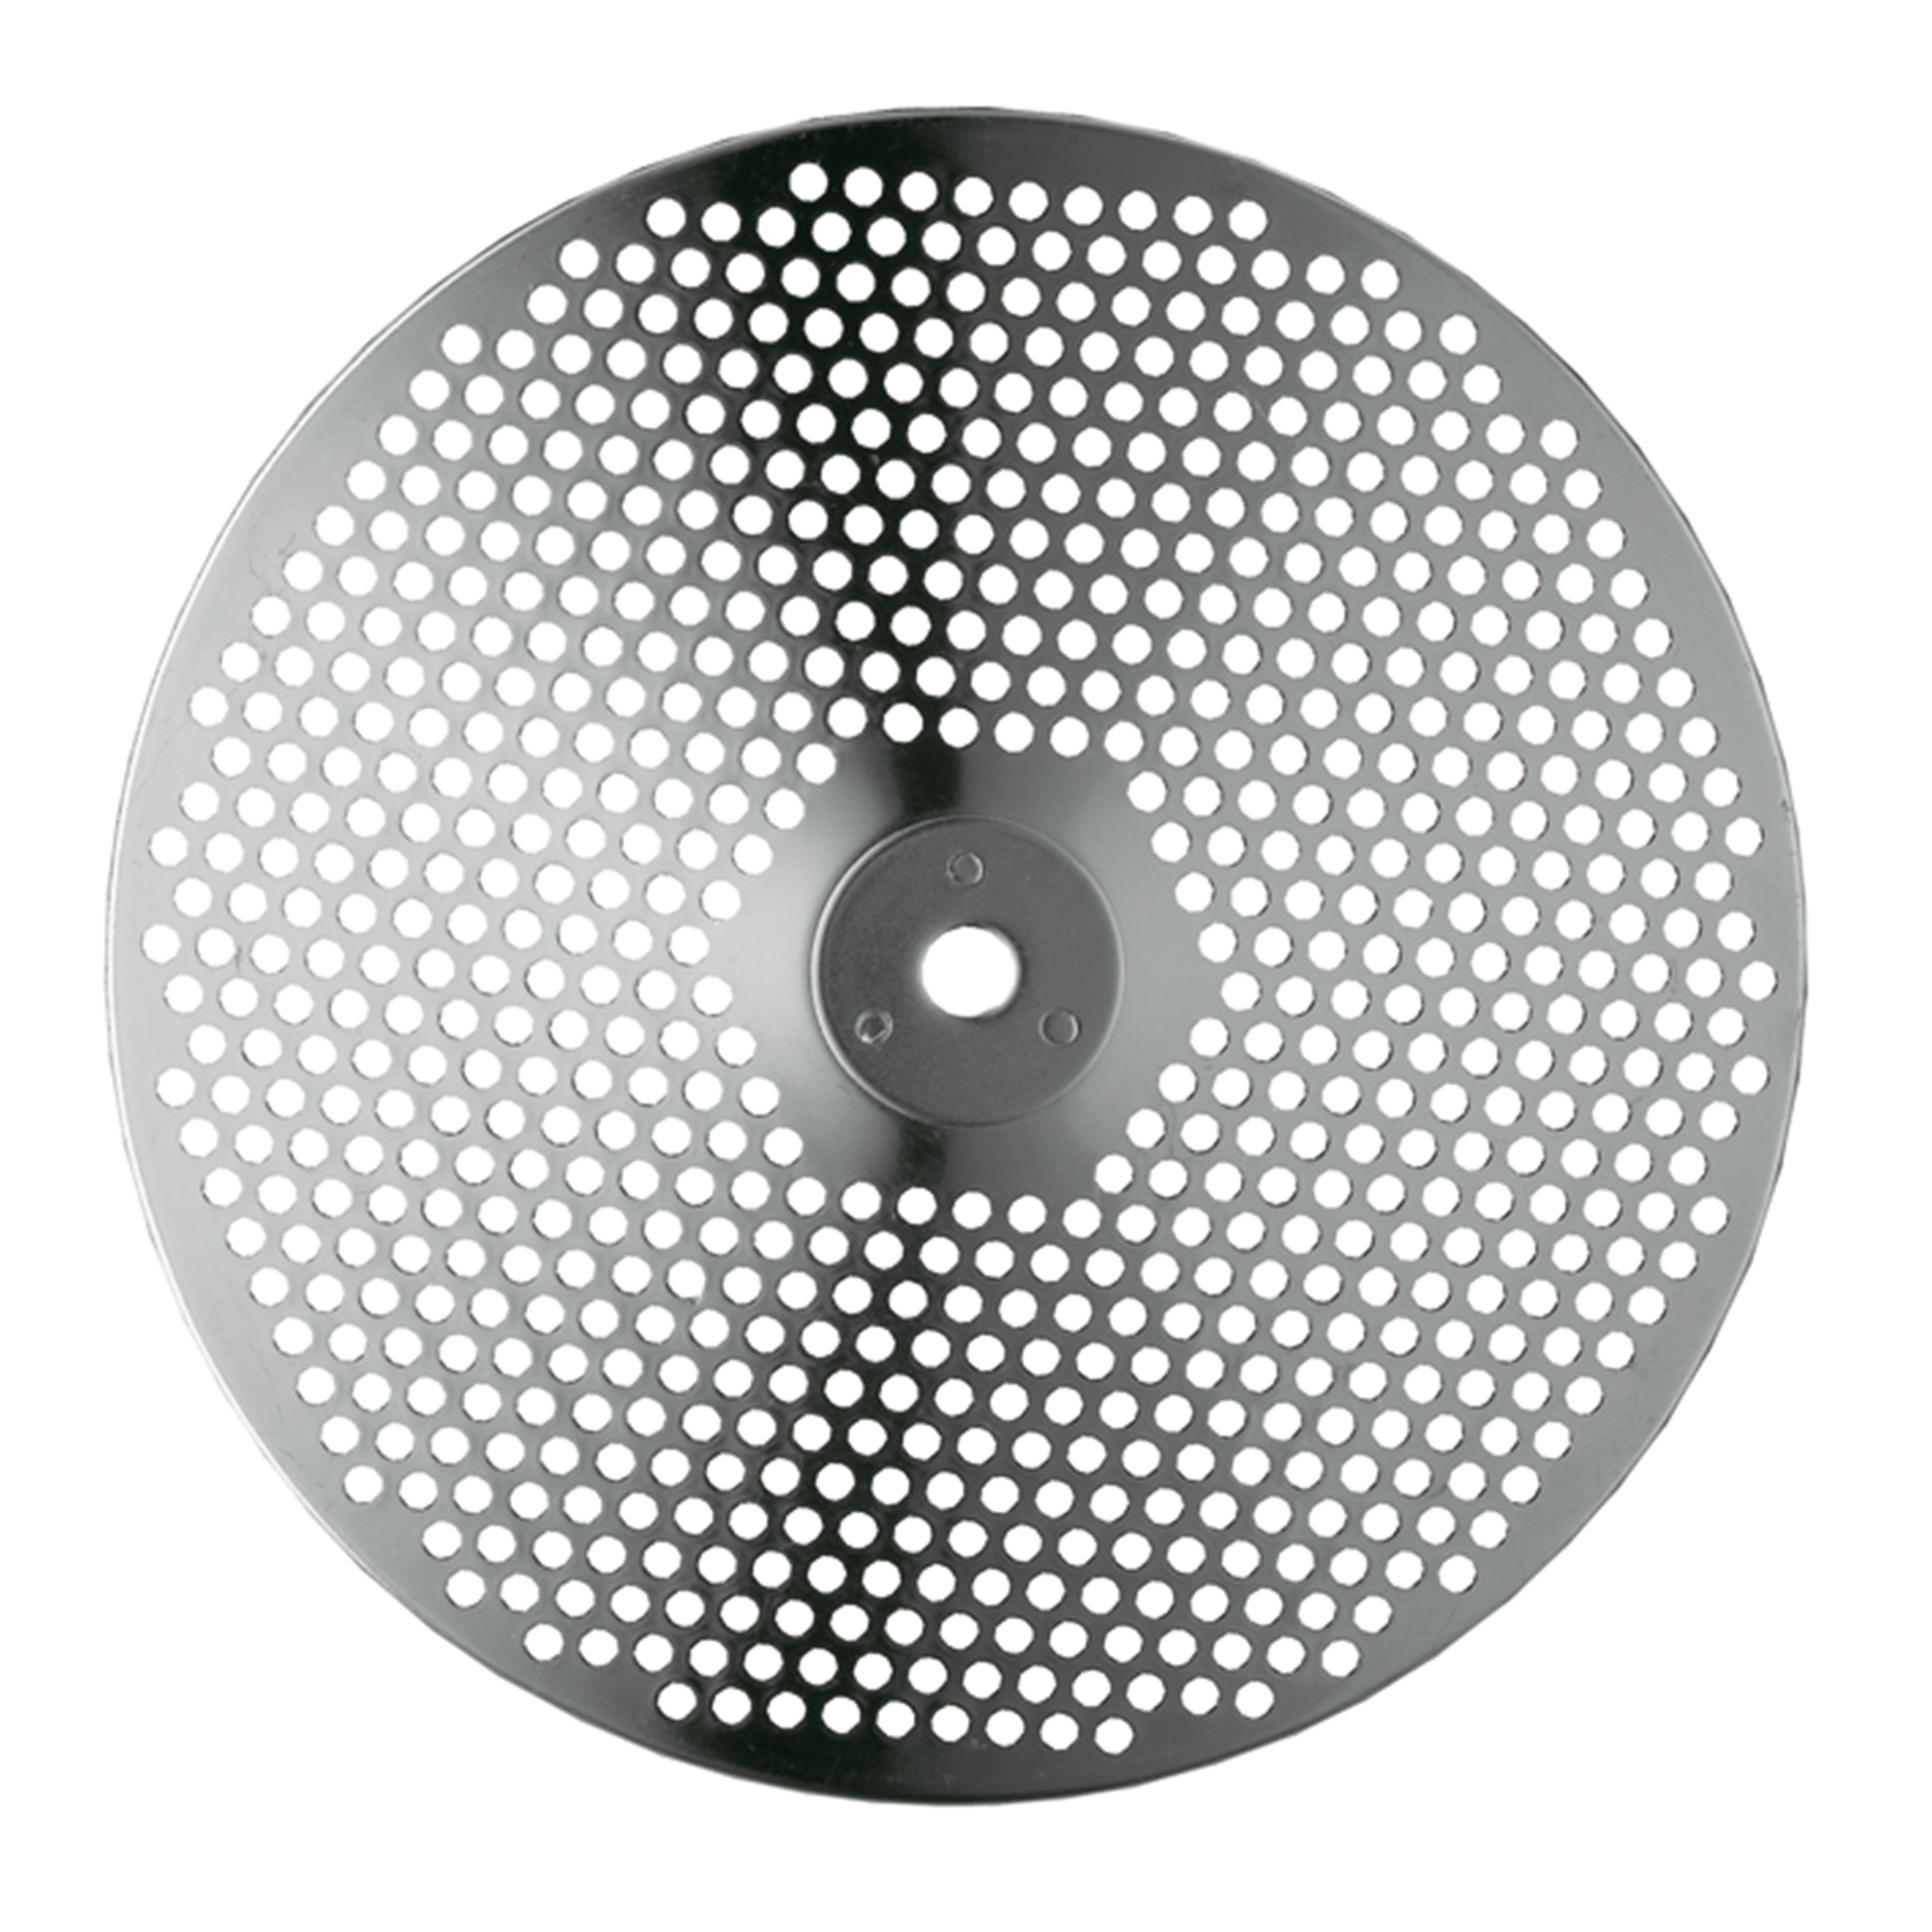 Sieve Disc 3 mm/0.1 in. (for Item no. 16251 & 16252)